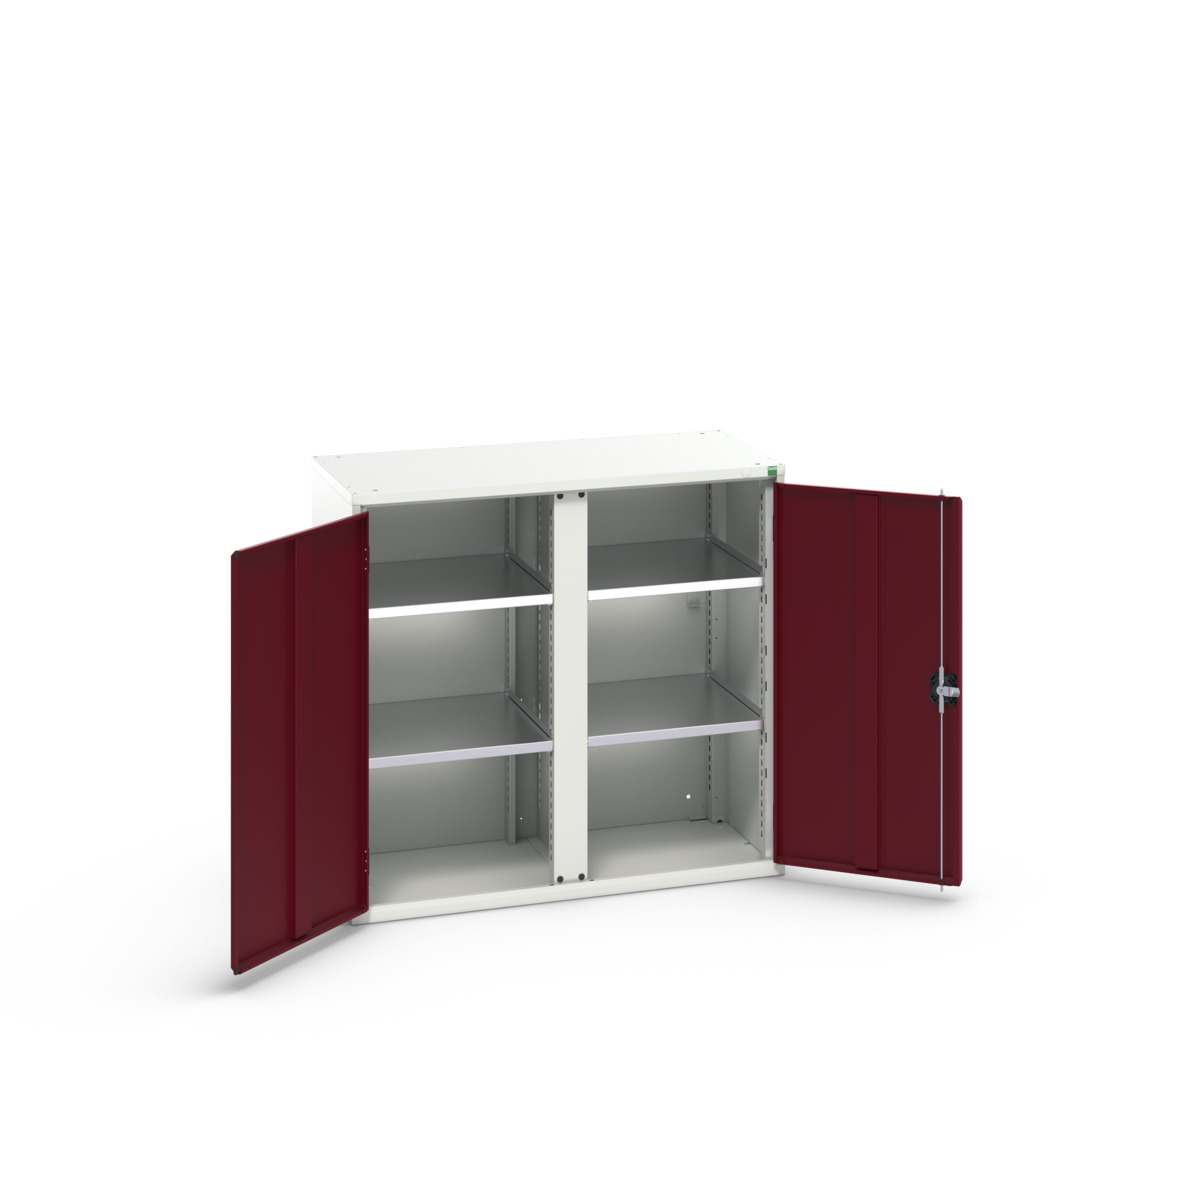 16926555.24 - verso kitted cupboard